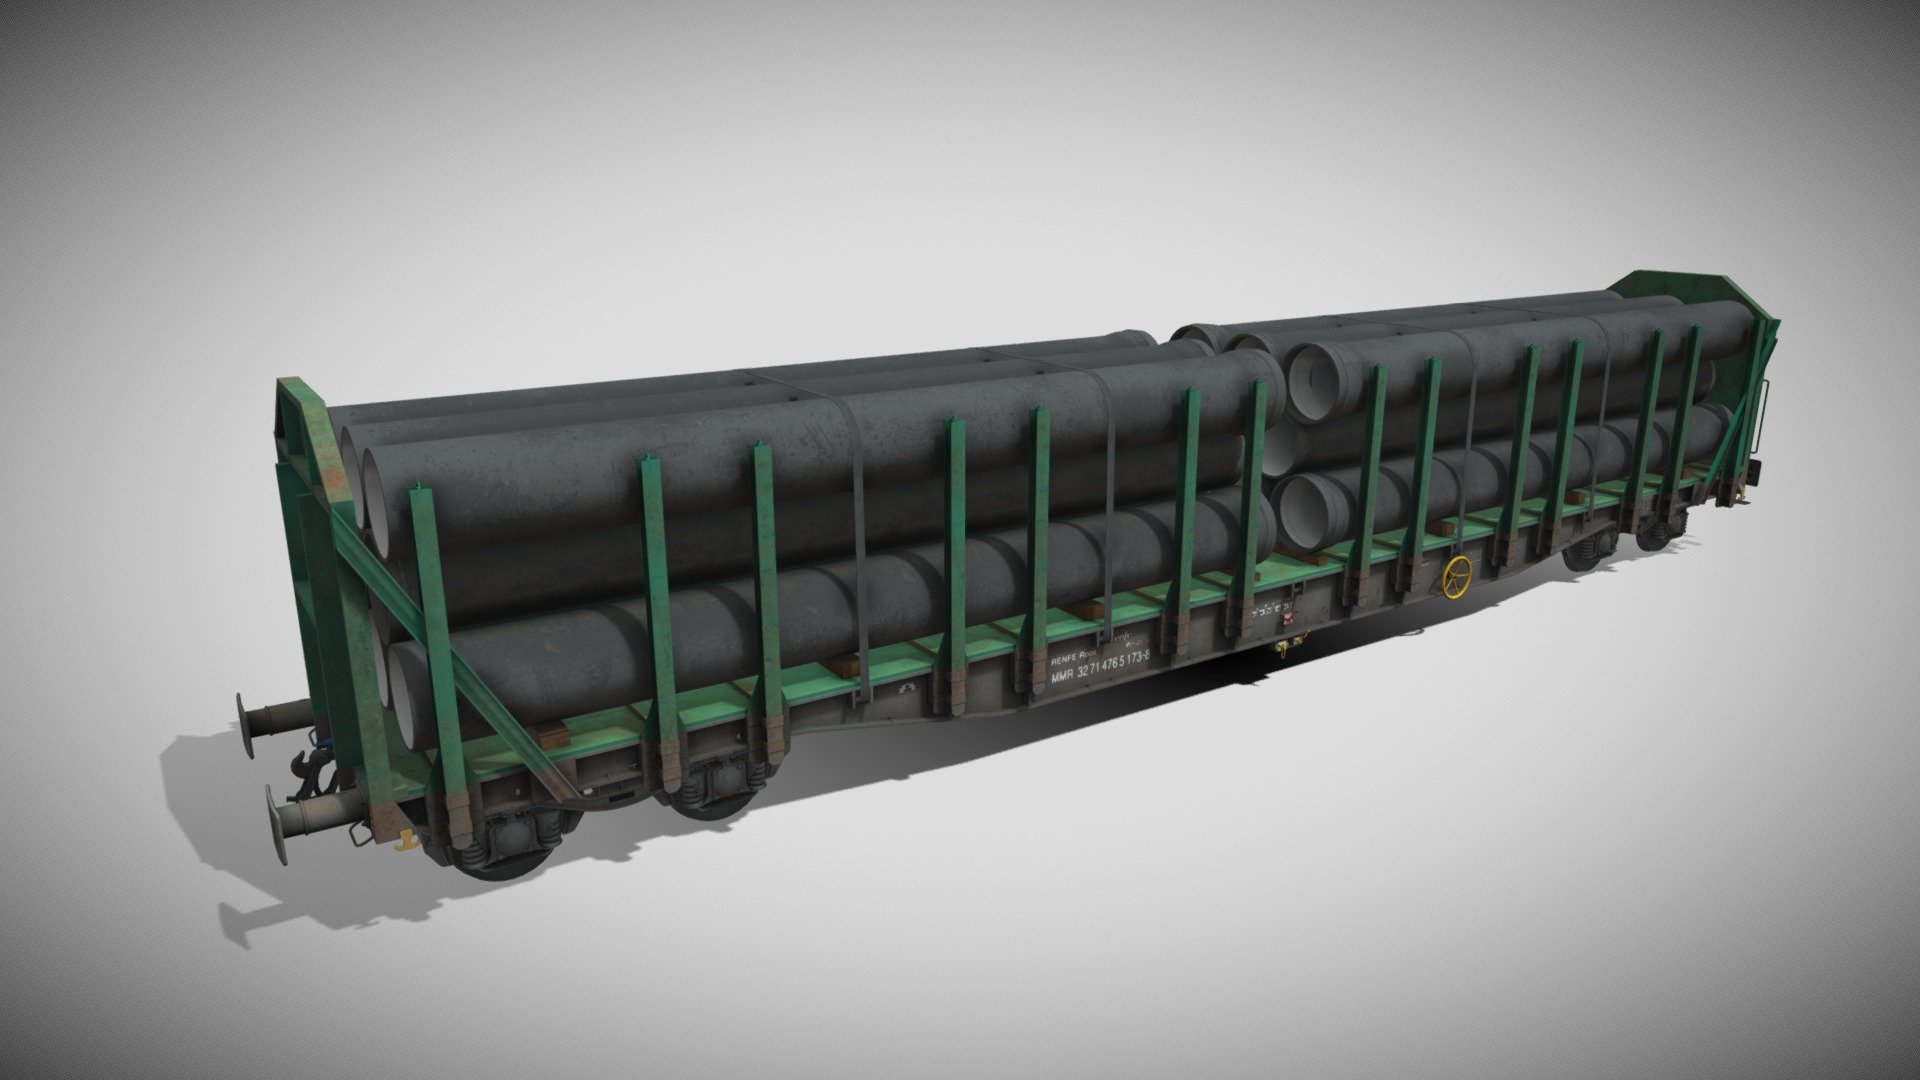 Mm5 Roos Freight wagon with black pipes

Highly detailed modeled freight car with 4k textures painted using PBR materials.

They use textures between 4096x4096 and 1024x1024 pixel and non overlapping unwrap.


File formats:

.obj + .mtl
.fbx

Textures included:

10 Albedo map - Mm5 Roos Freight wagon with black pipes - Buy Royalty Free 3D model by scailman 3d model